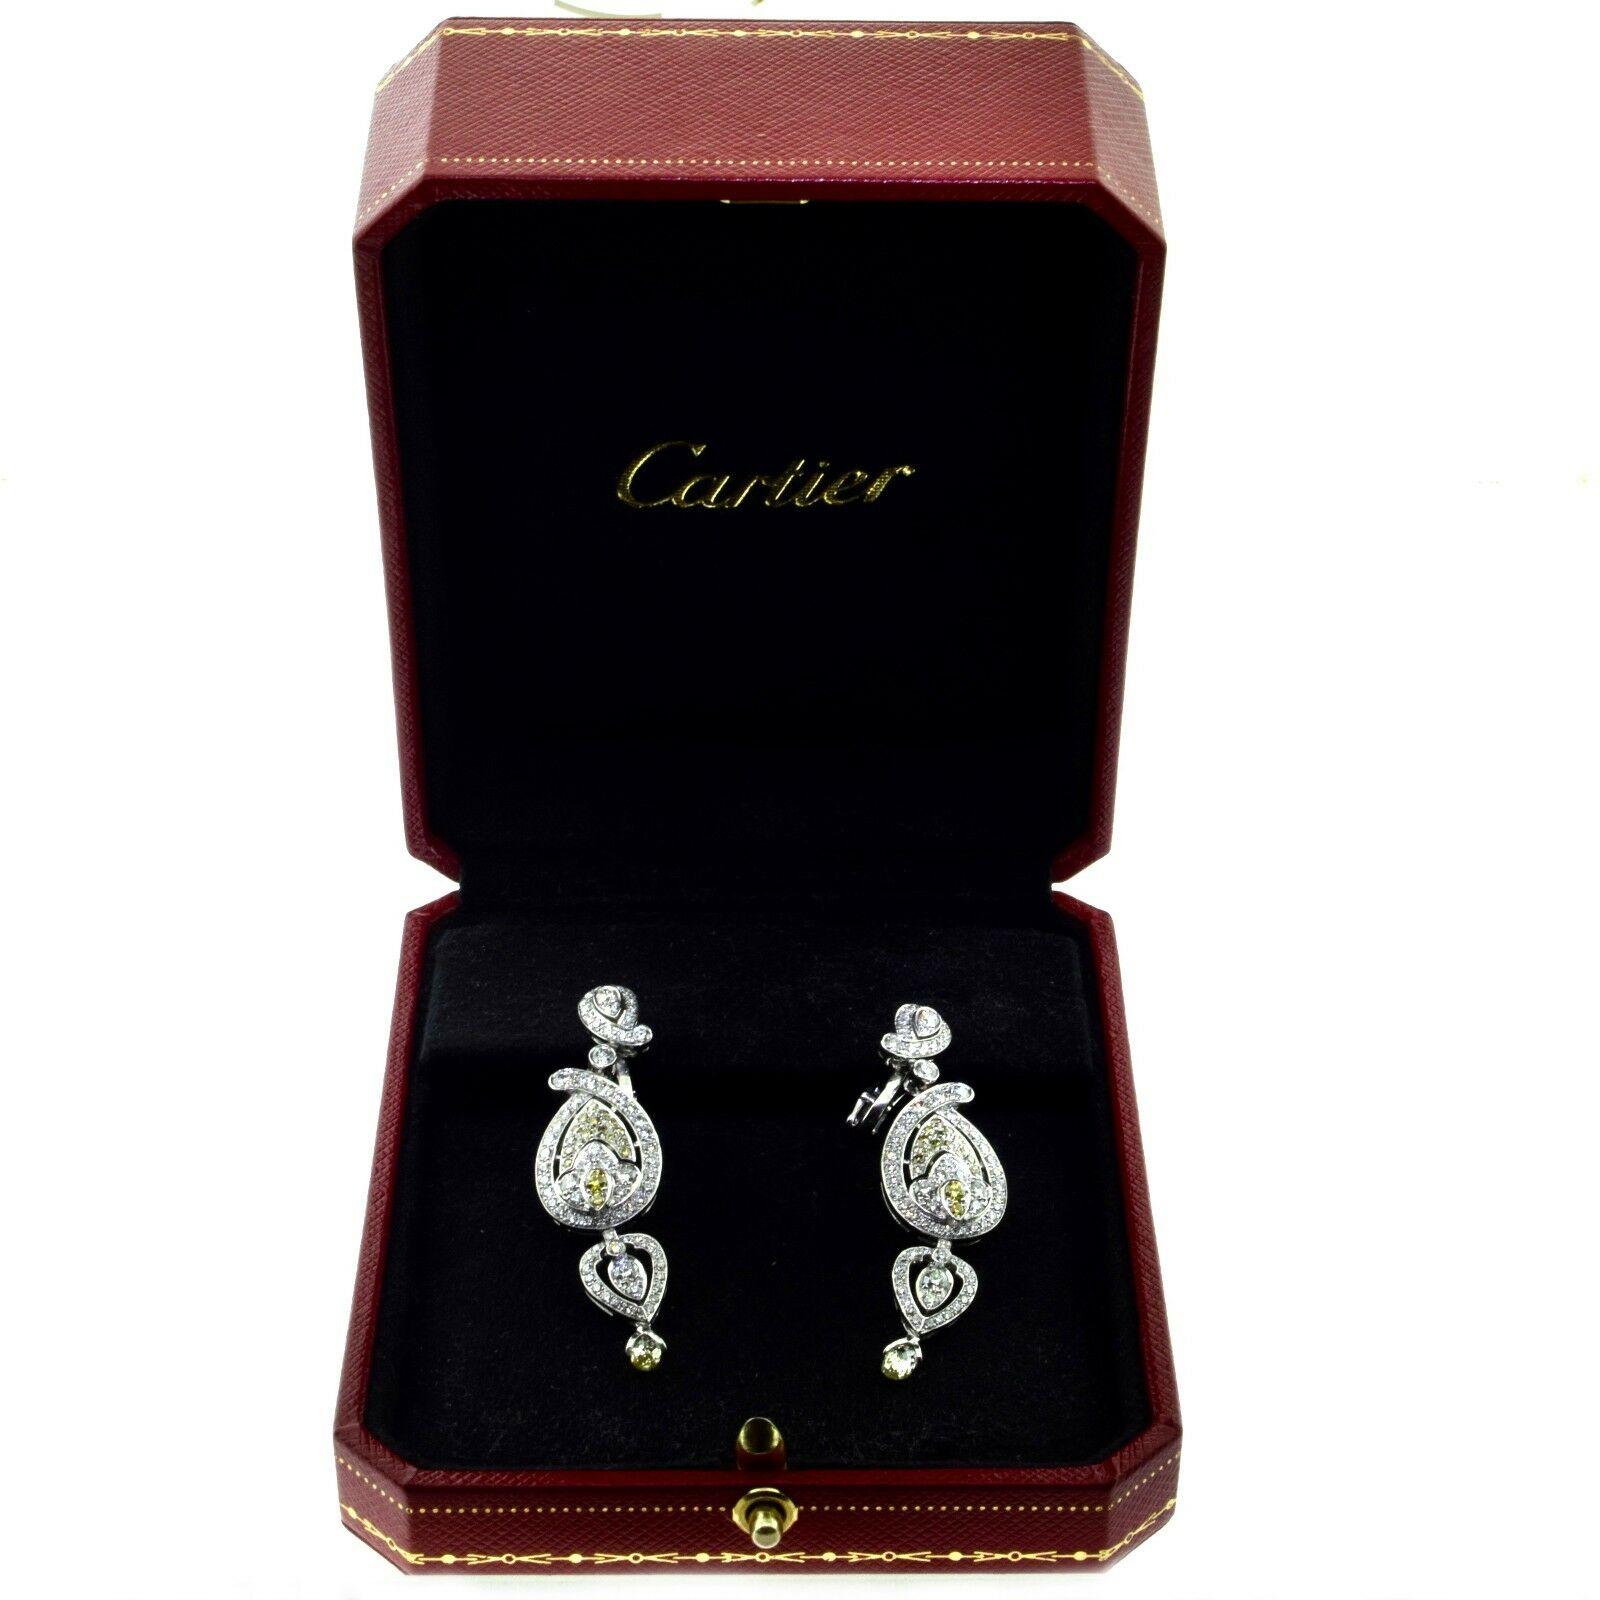 Brilliant Cut Cartier White and Yellow Diamond Dangle Platinum Earrings with Papers, 10 Carat